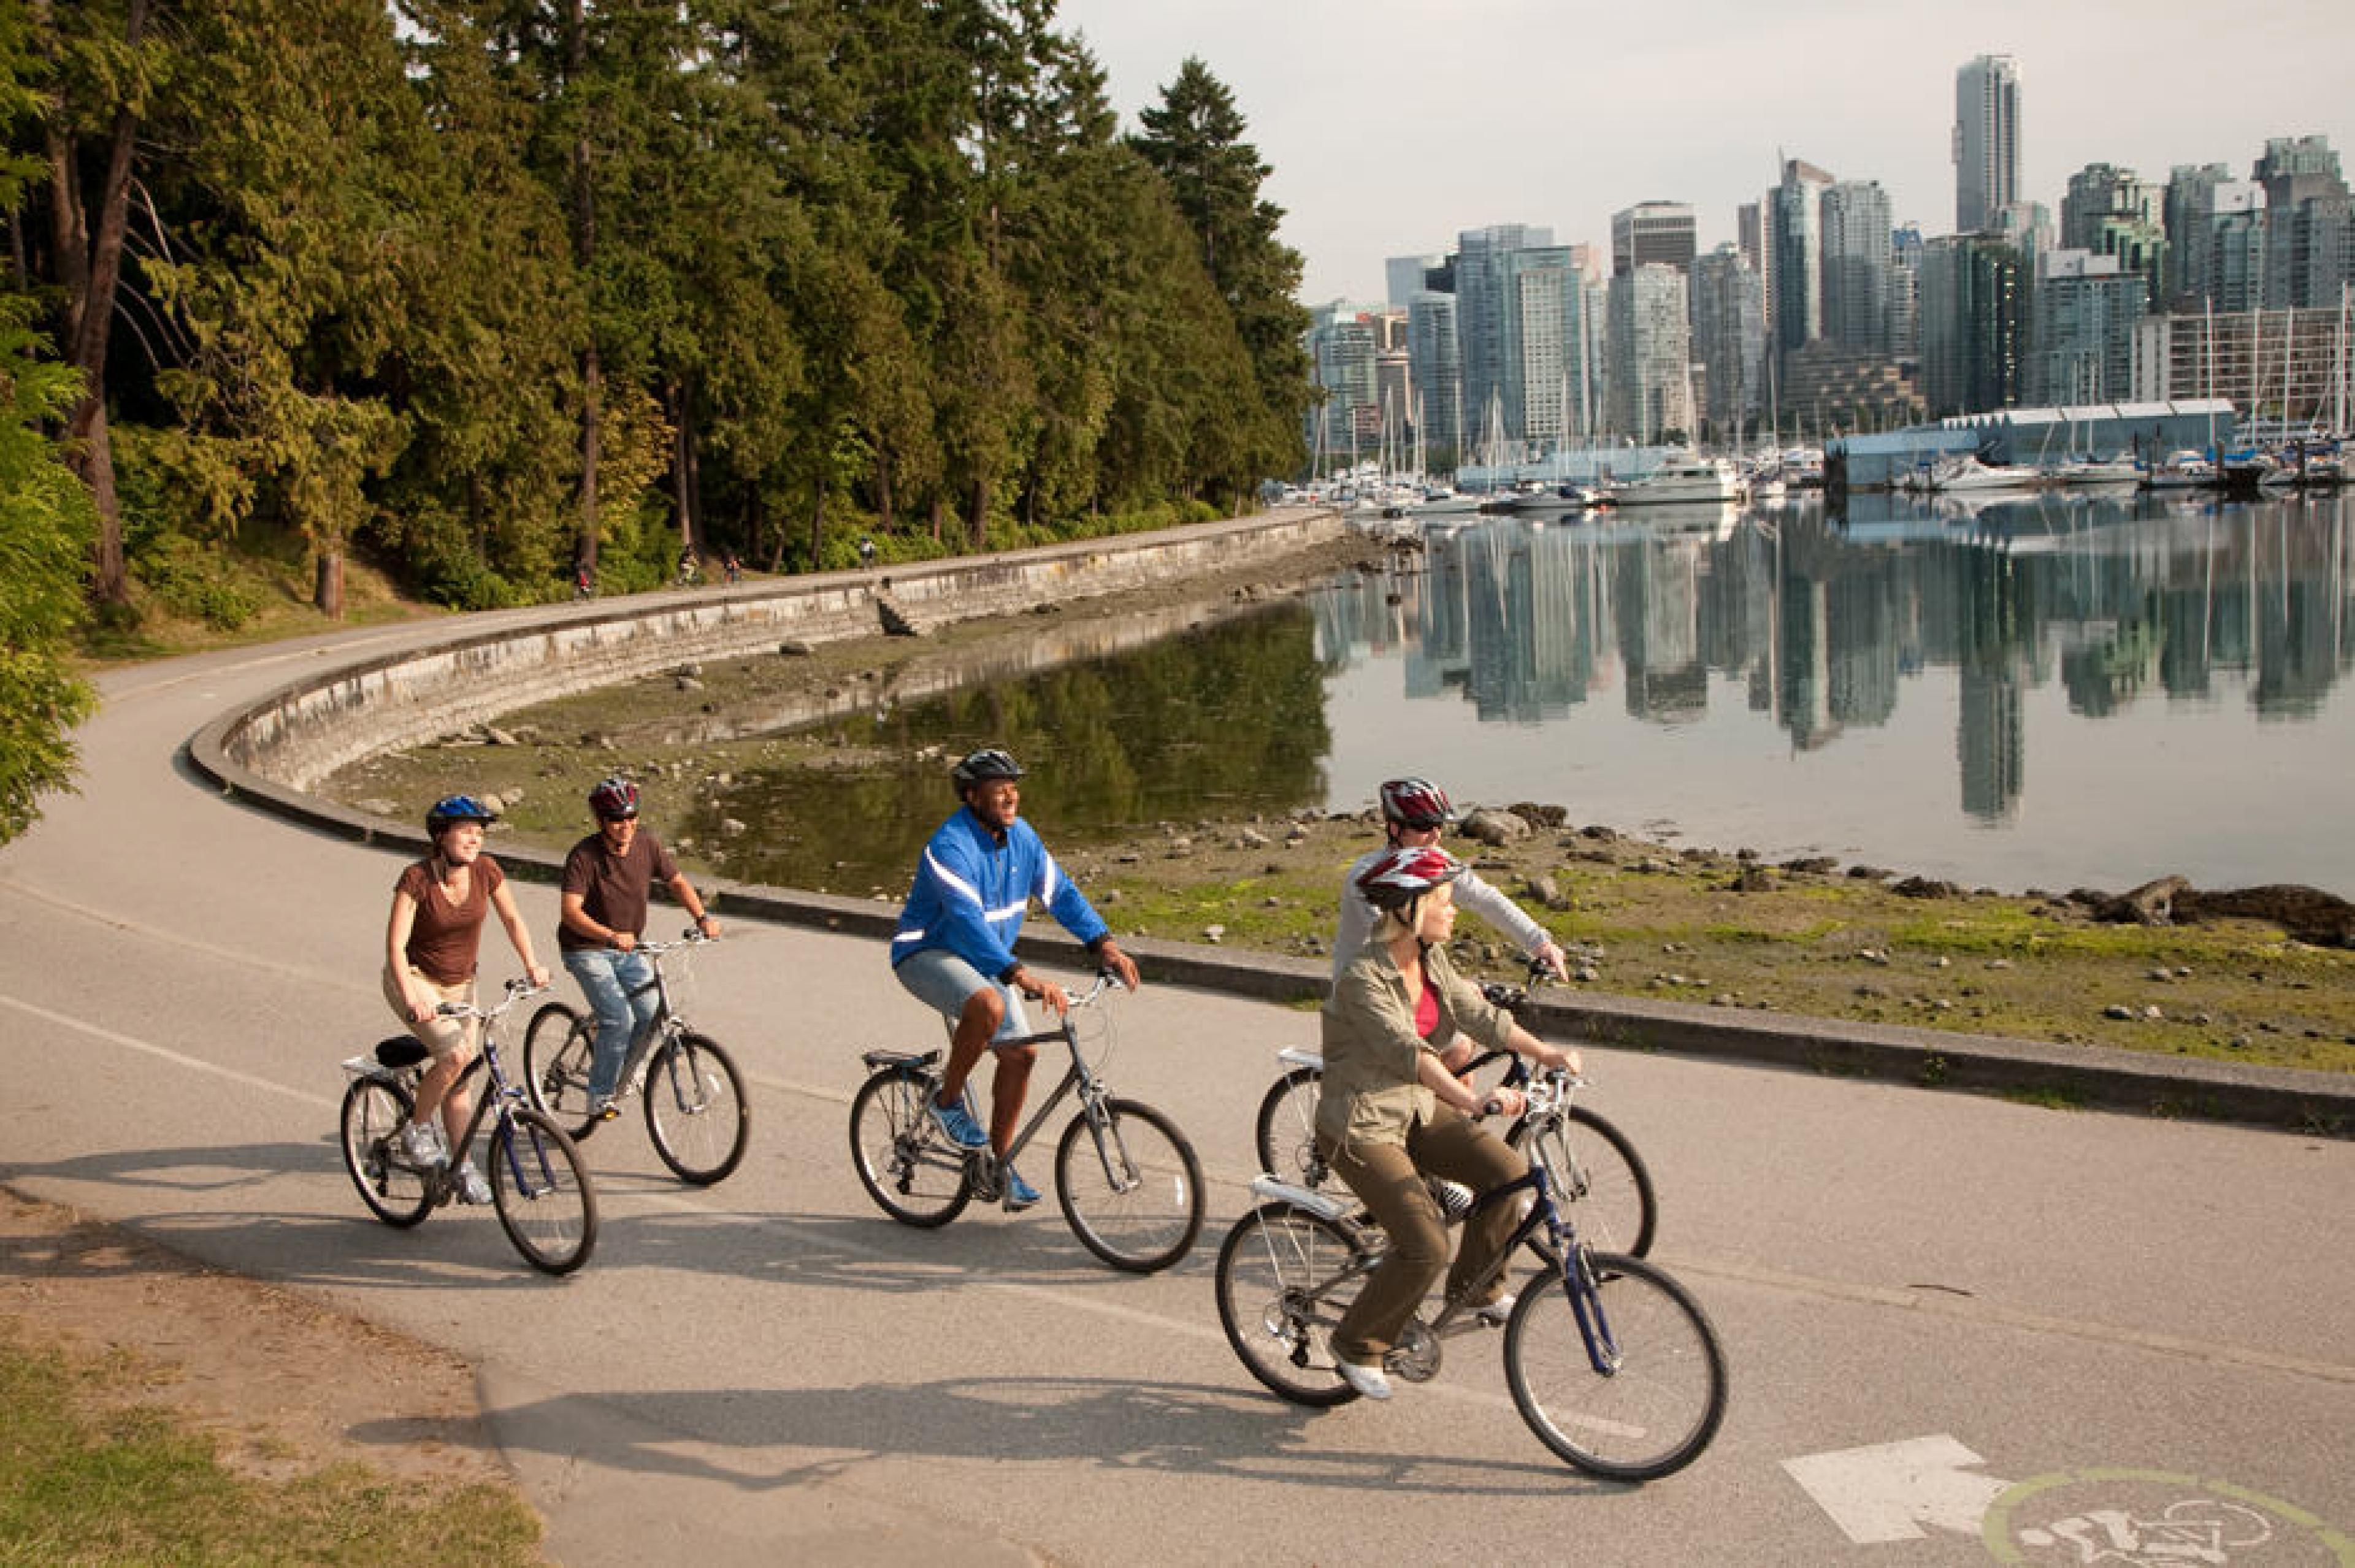 Cyclling at Stanley Park, Vancouver, Canada - Courtesy Coast Mountain Photography